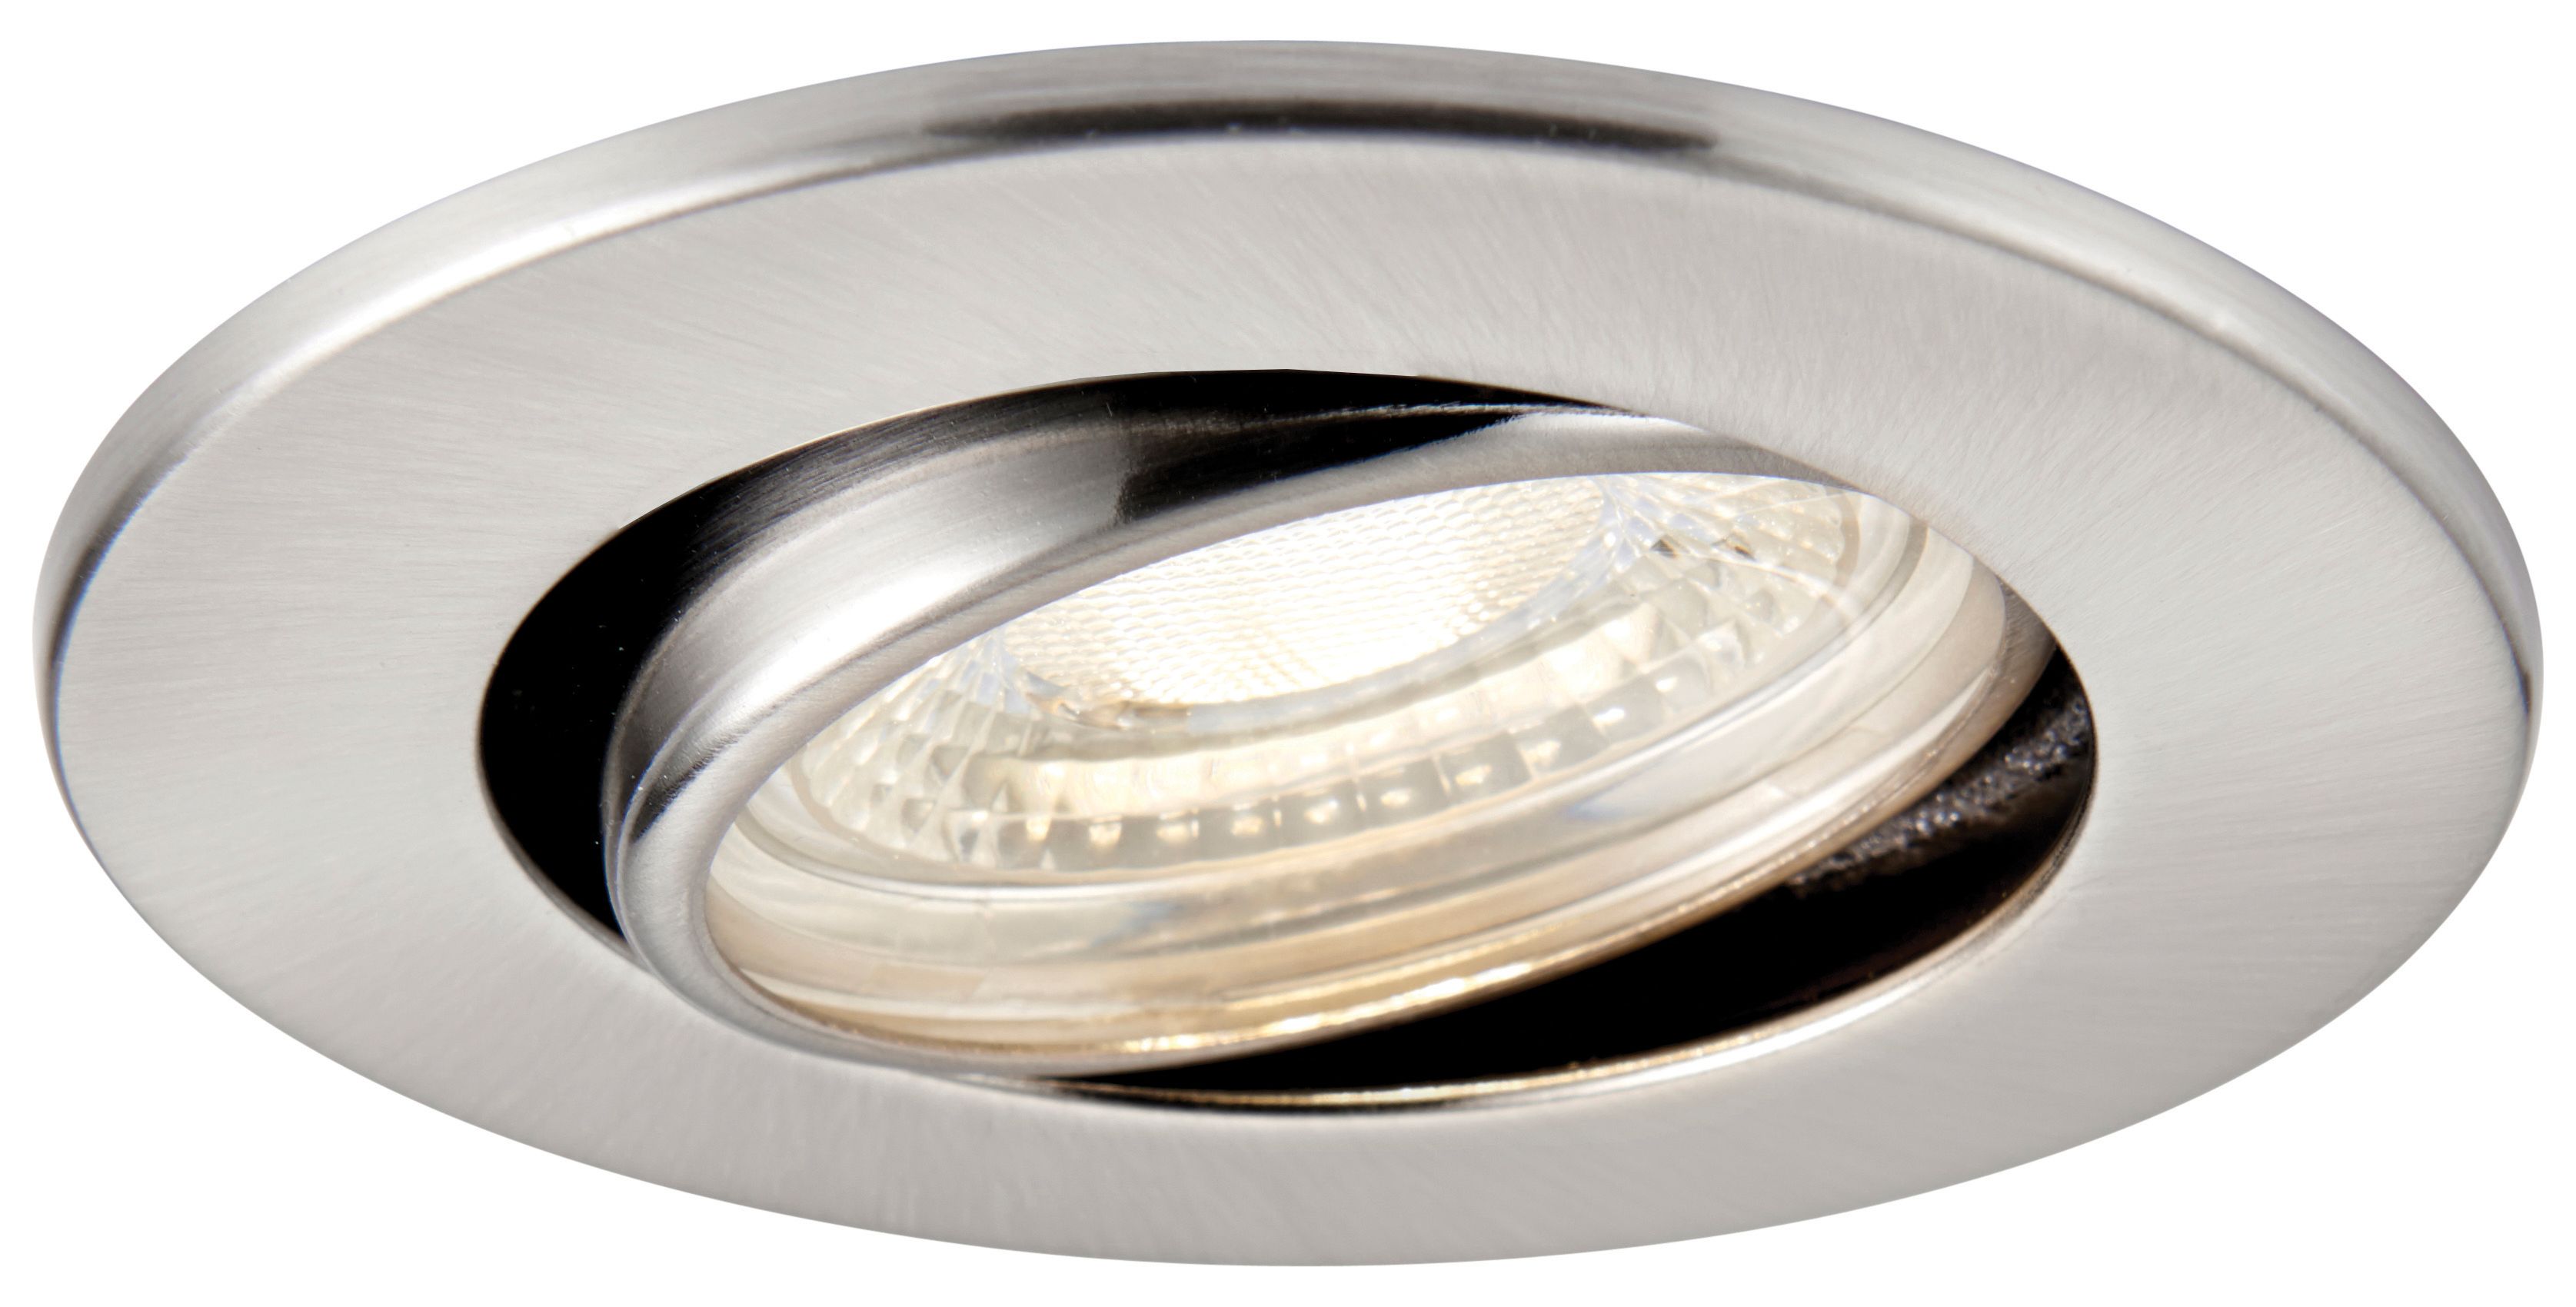 Saxby Integrated LED Fire Rated Adjustable Cool White Dimmable Downlight - Brushed Nickel